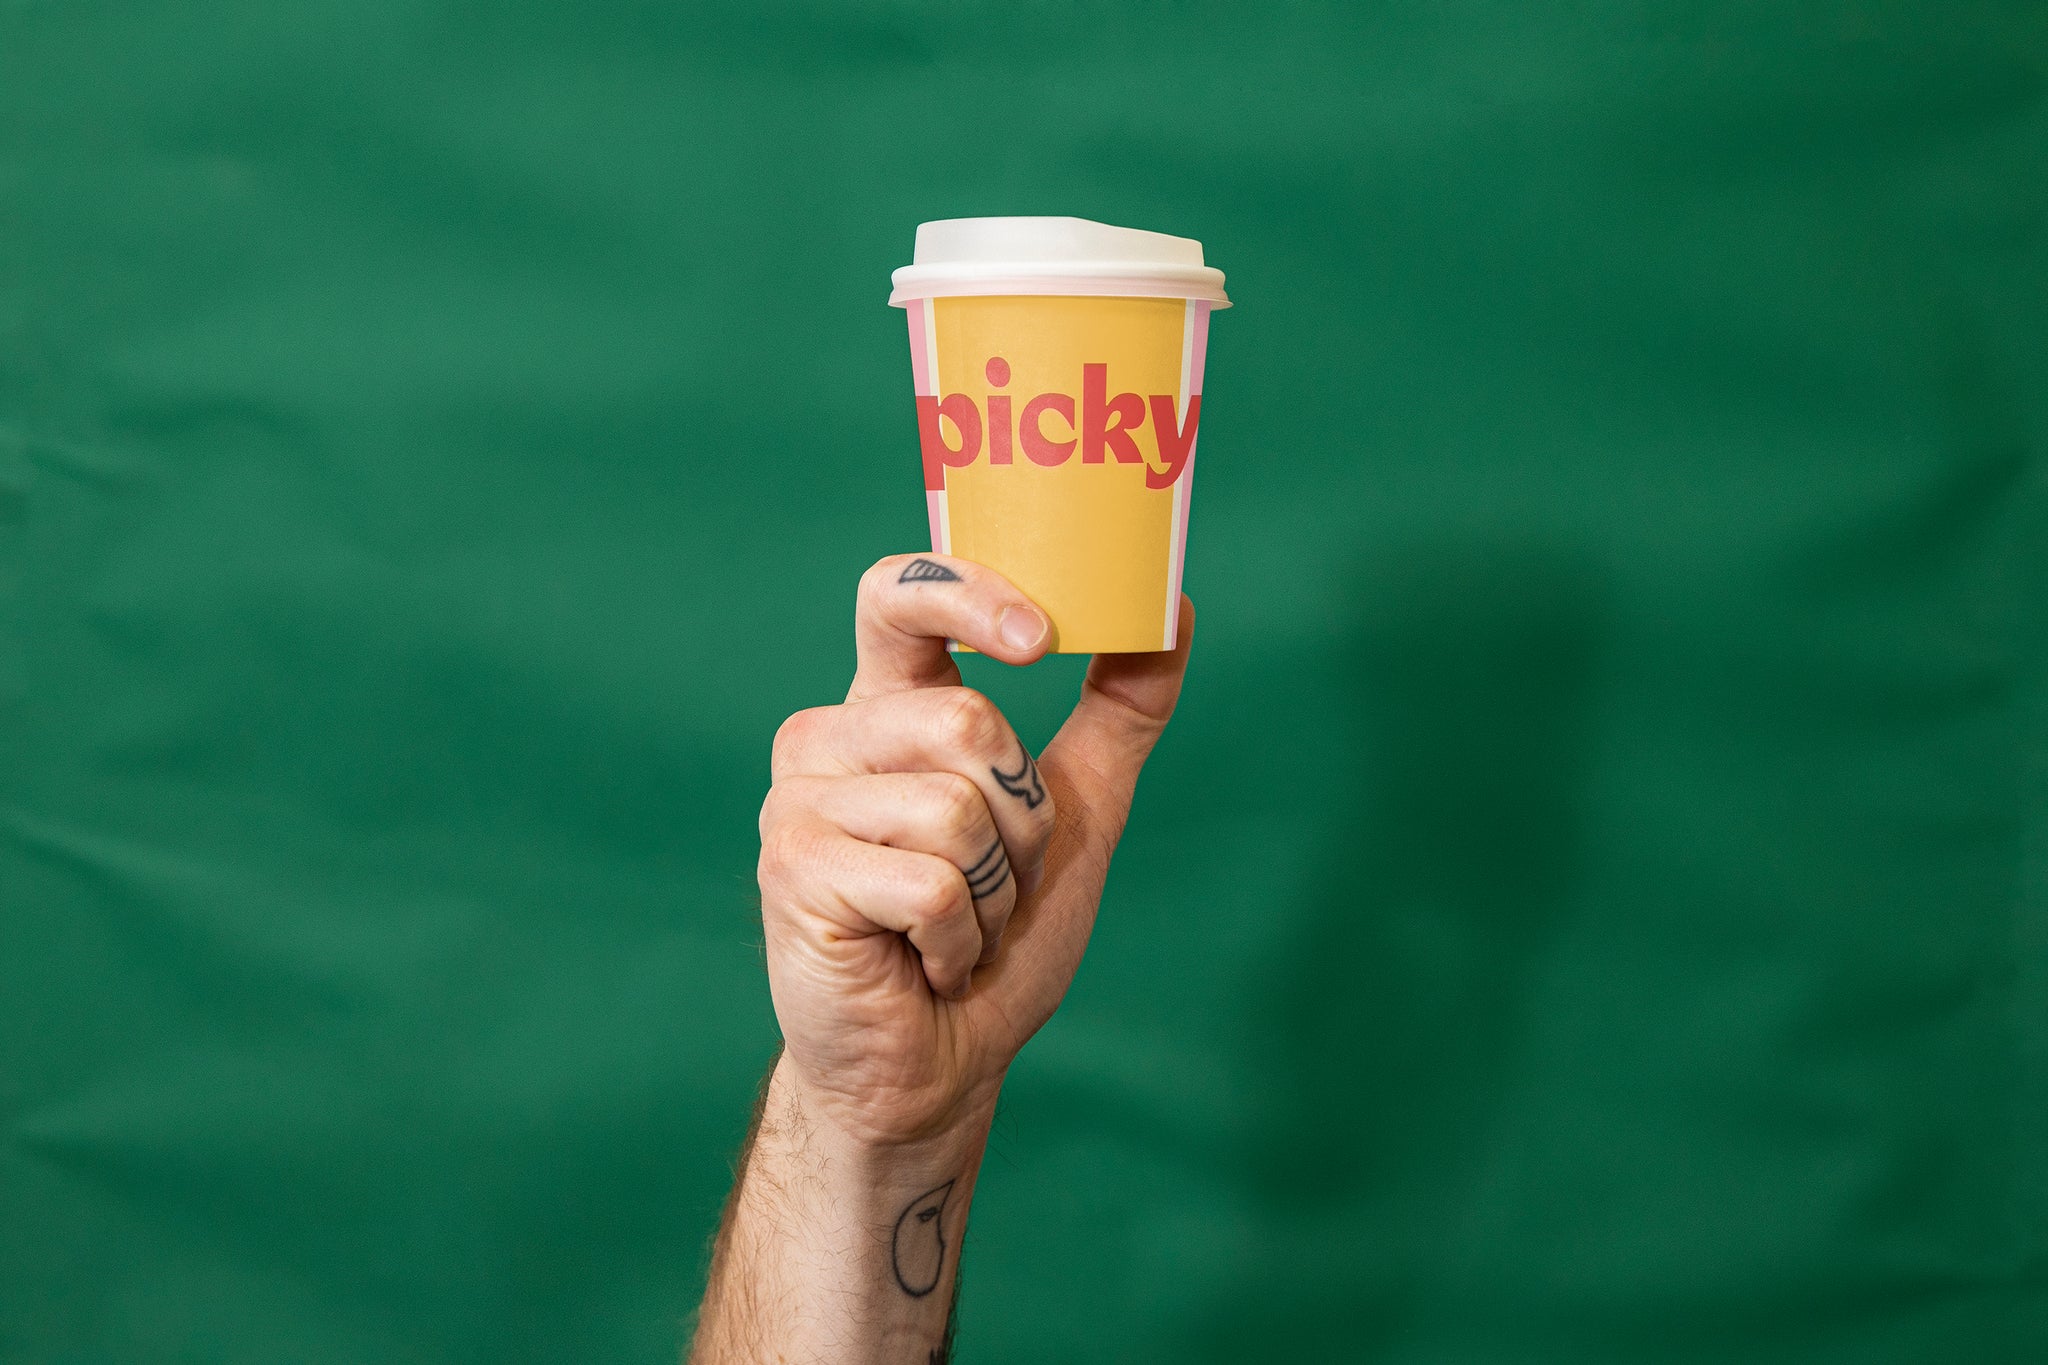 Tattooed hand holding up an orange disposable coffee cup with white lid. The word Picky is written in red on the front of the cup. Green fabric background. 